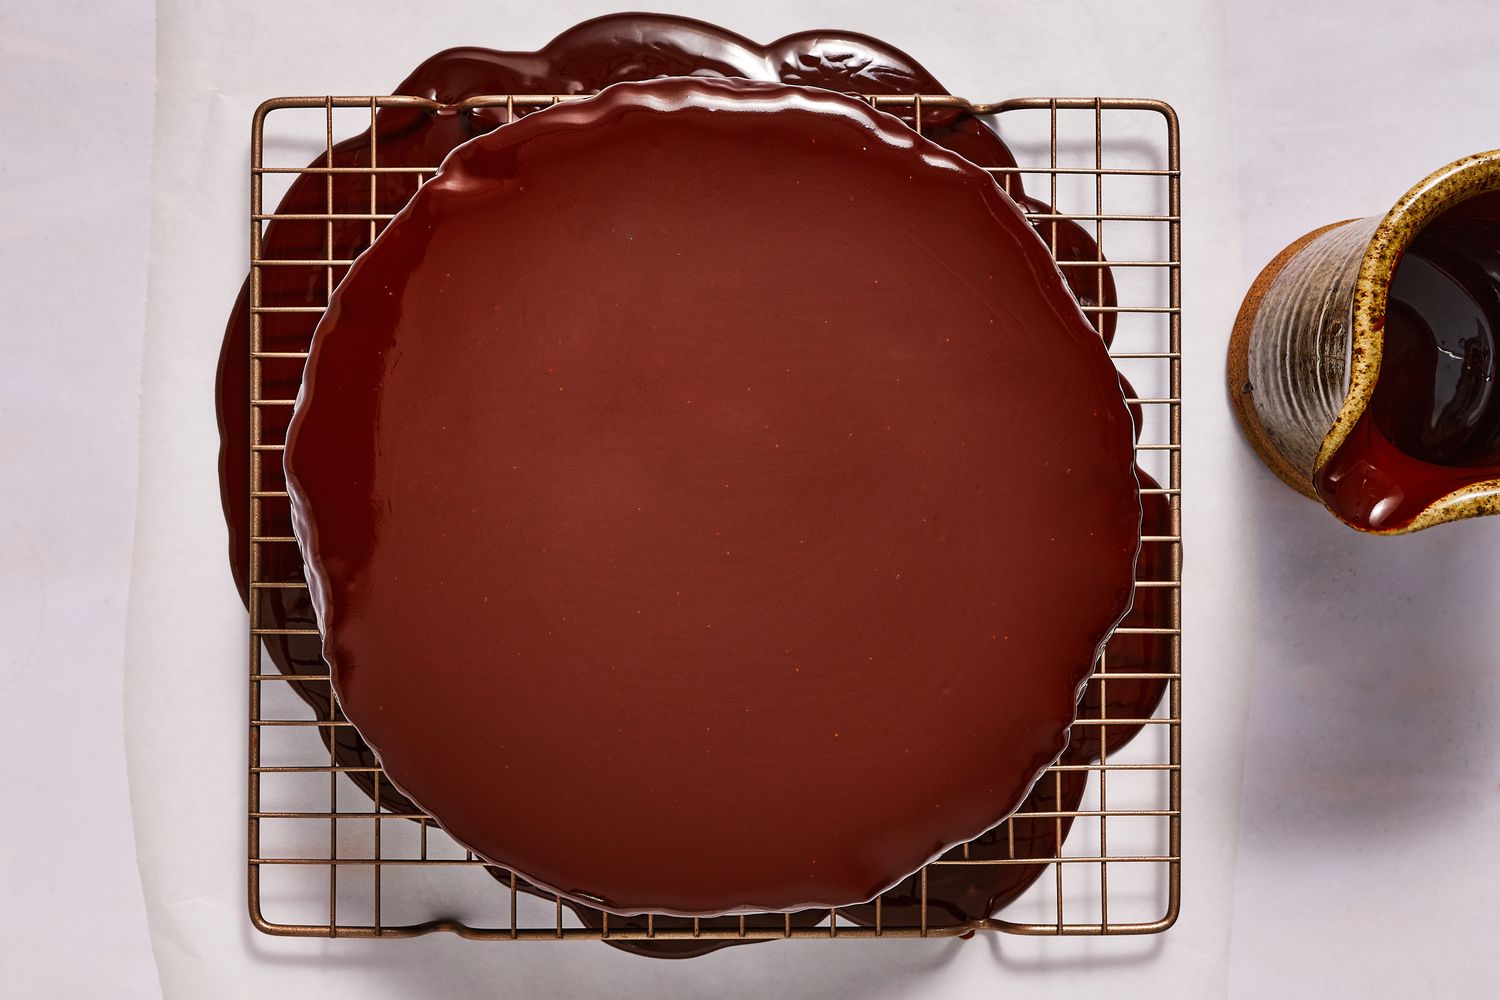 chocolate glaze poured over chocolate mousse cake on rack